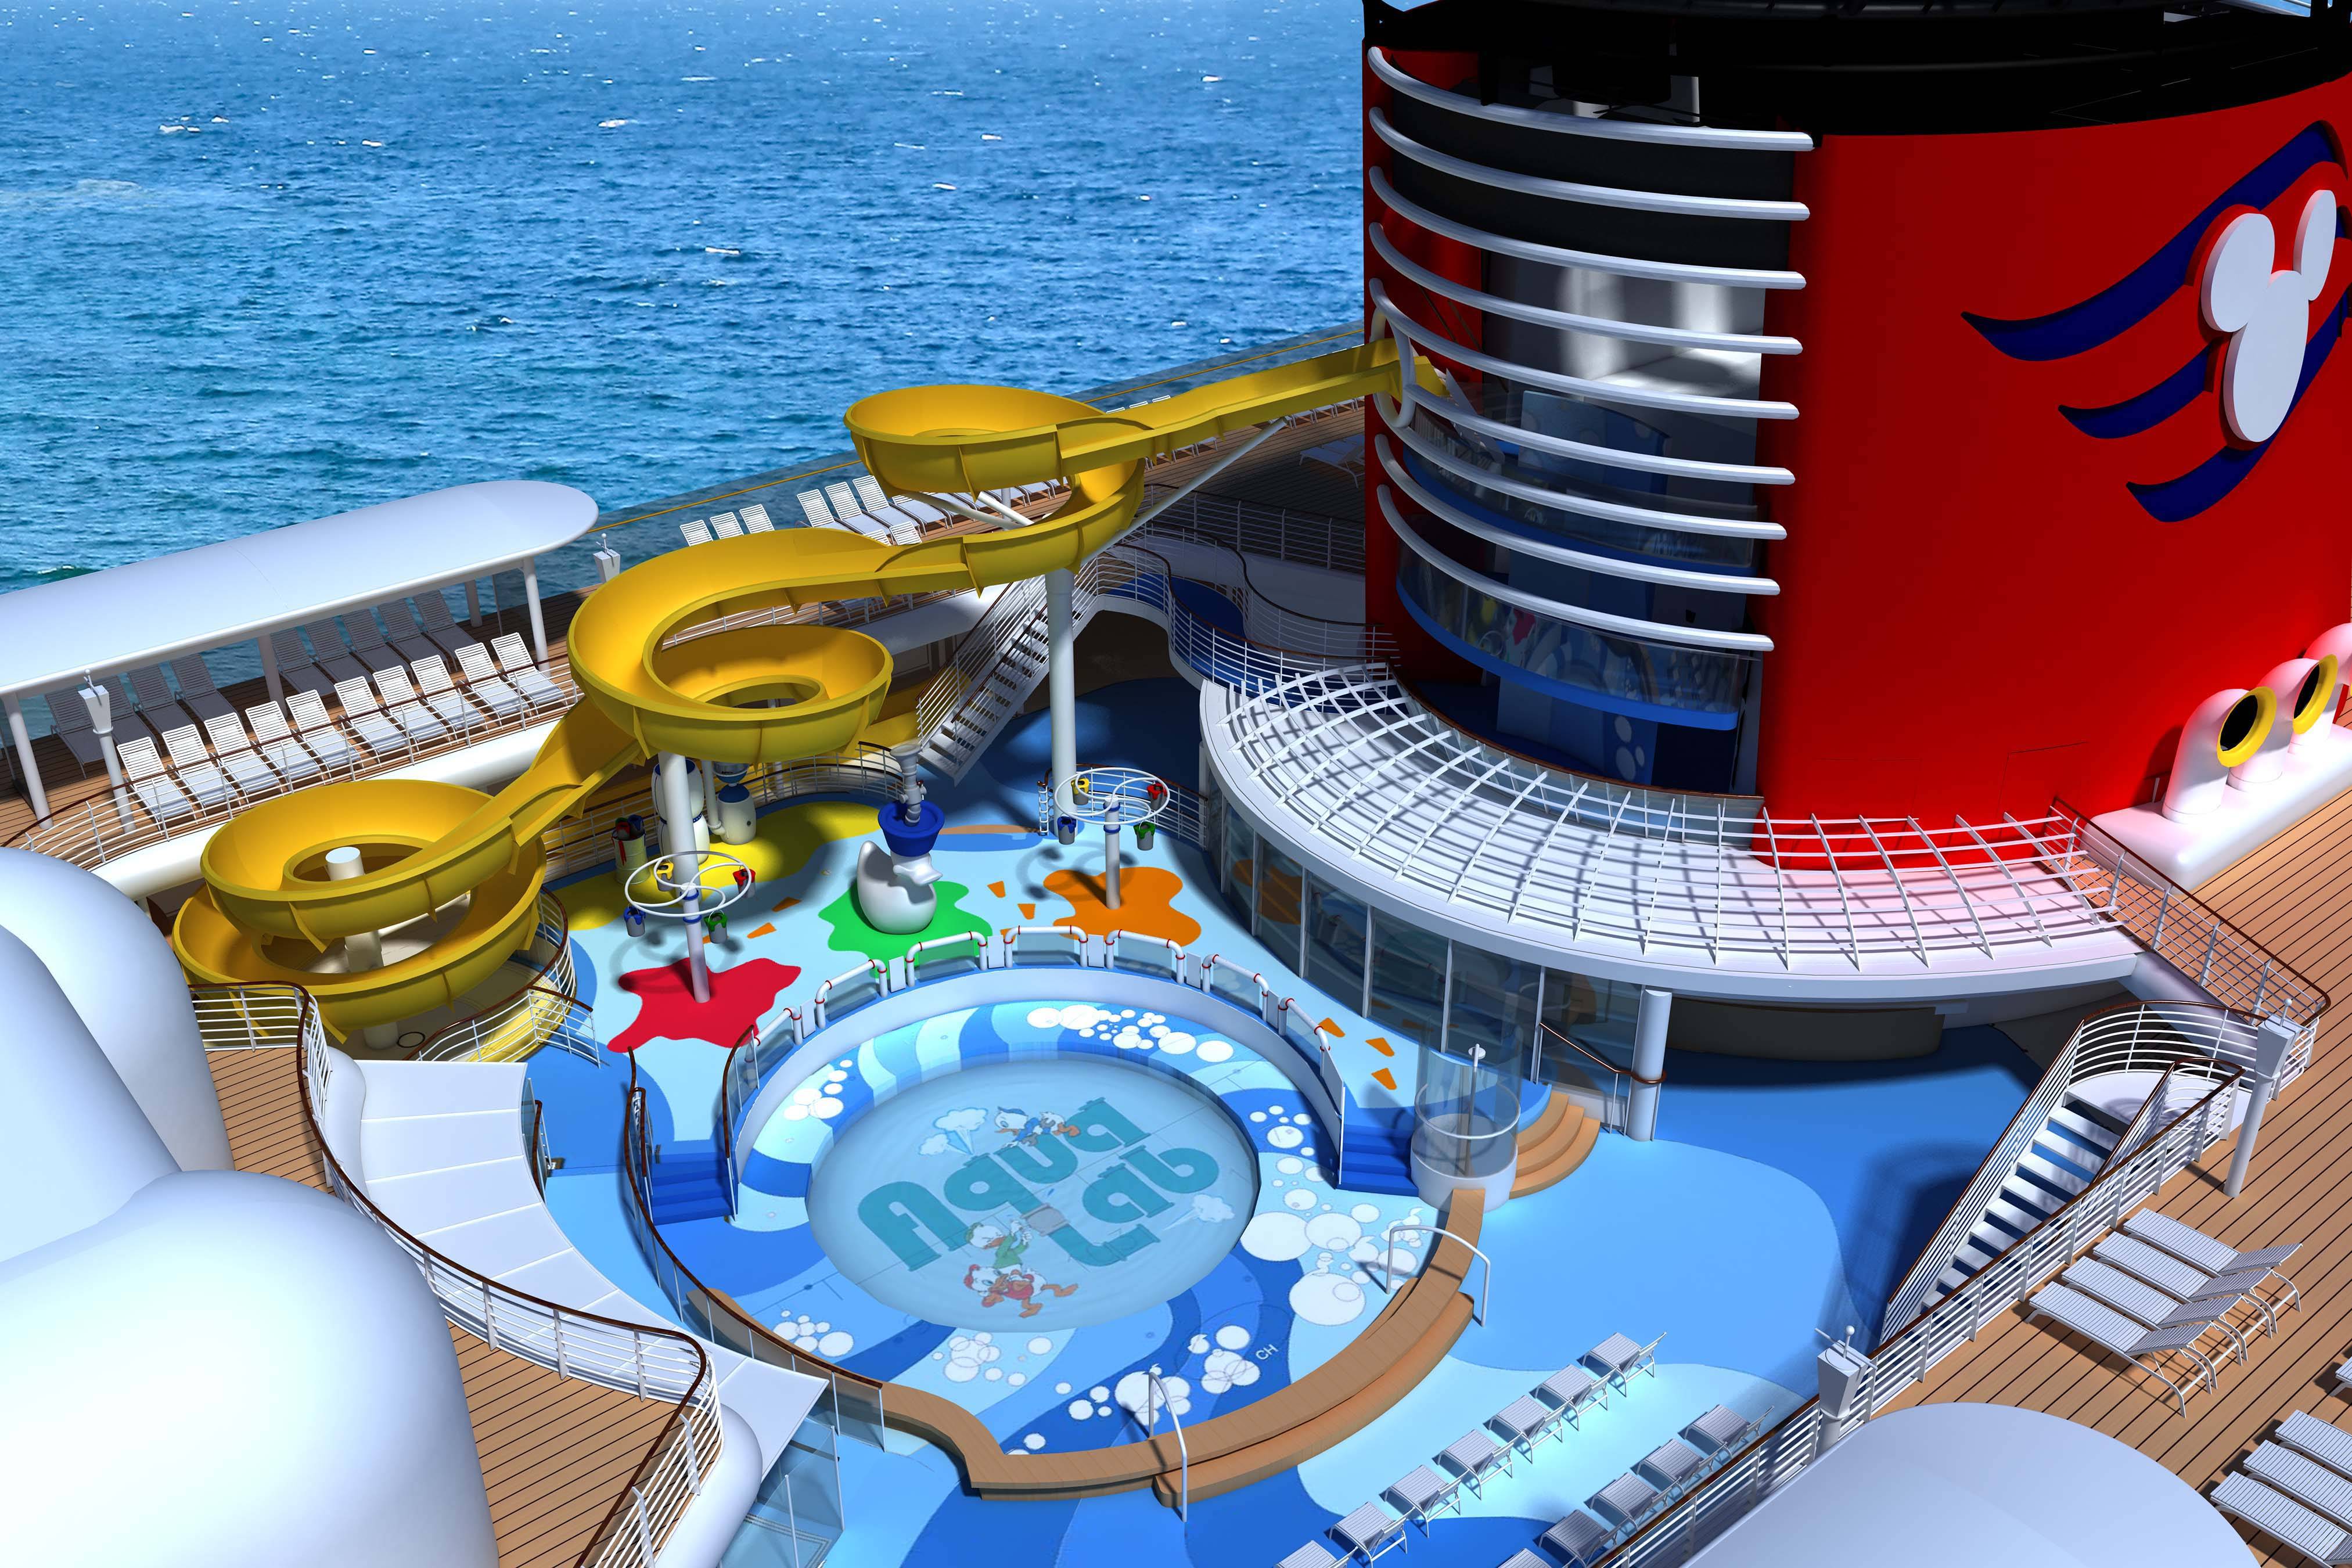 In the new Aqua Lab water playground on the Disney Magic, families can frolic among pop jets, geysers and bubblers. Interactive games keep the kids moving, while the Twist n’ Spout water slide gets them delightfully drenched.